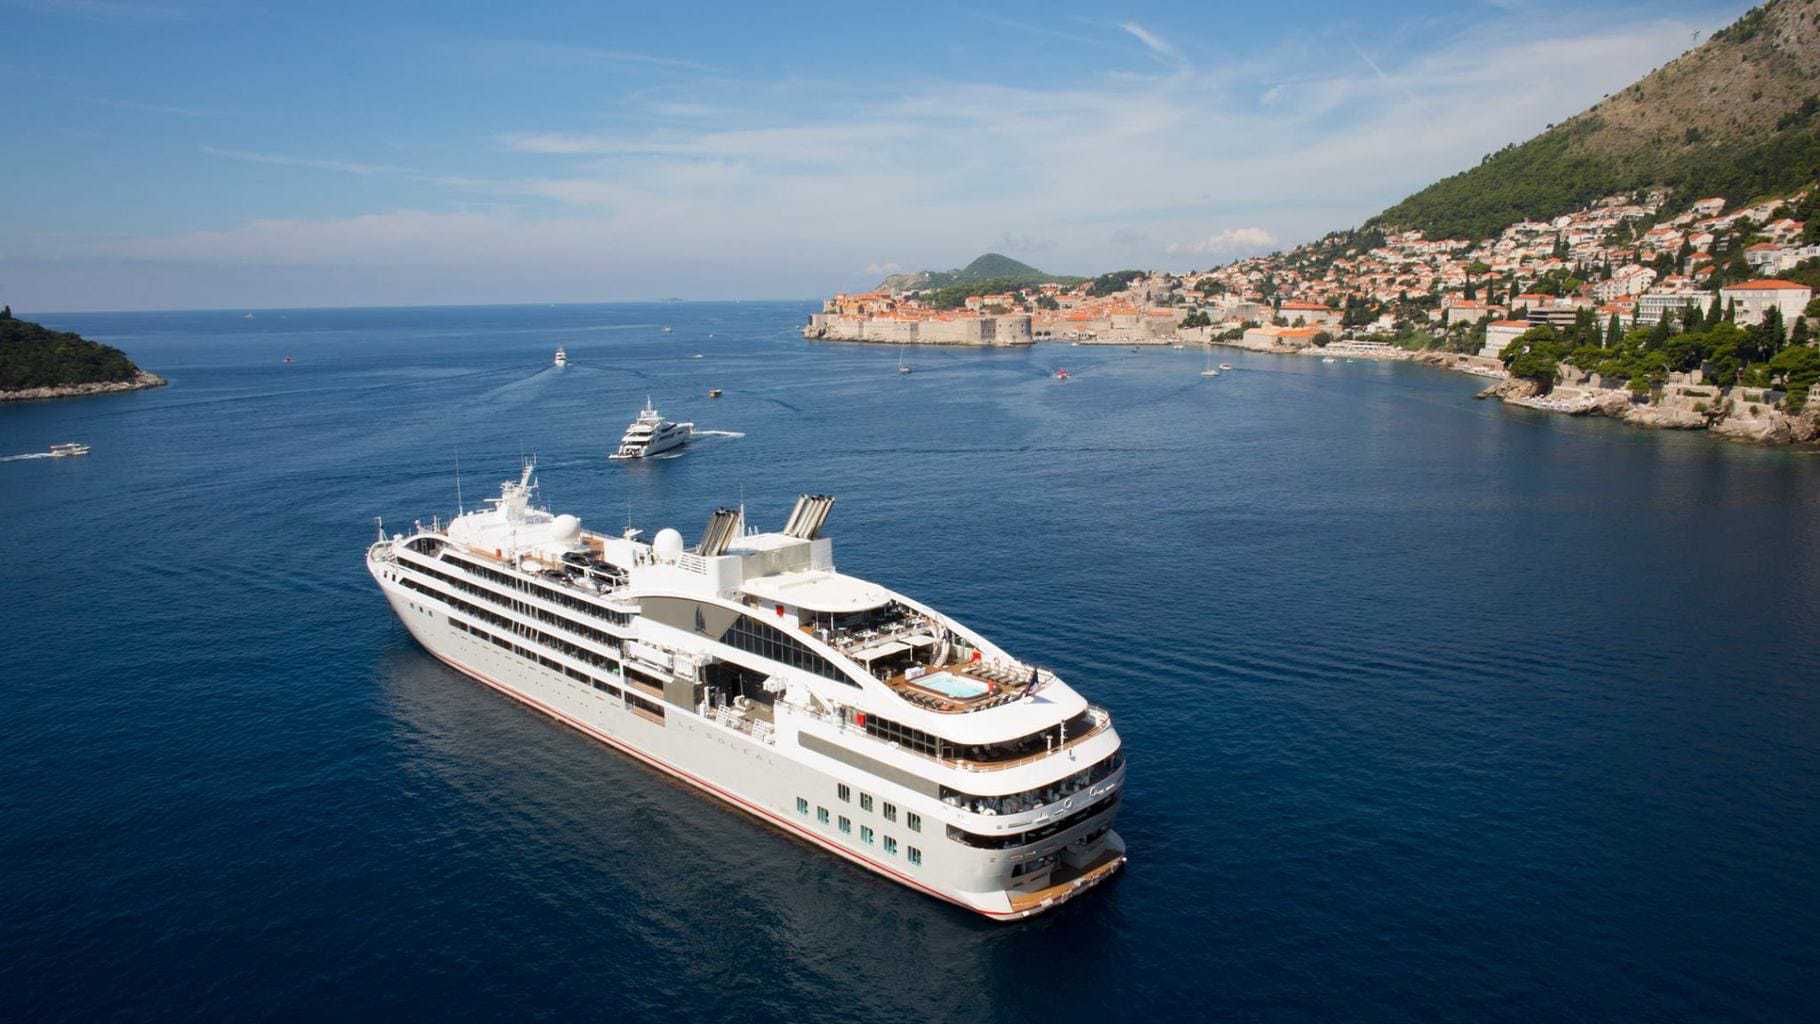 7 Things to see and do on a Mediterranean Cruise